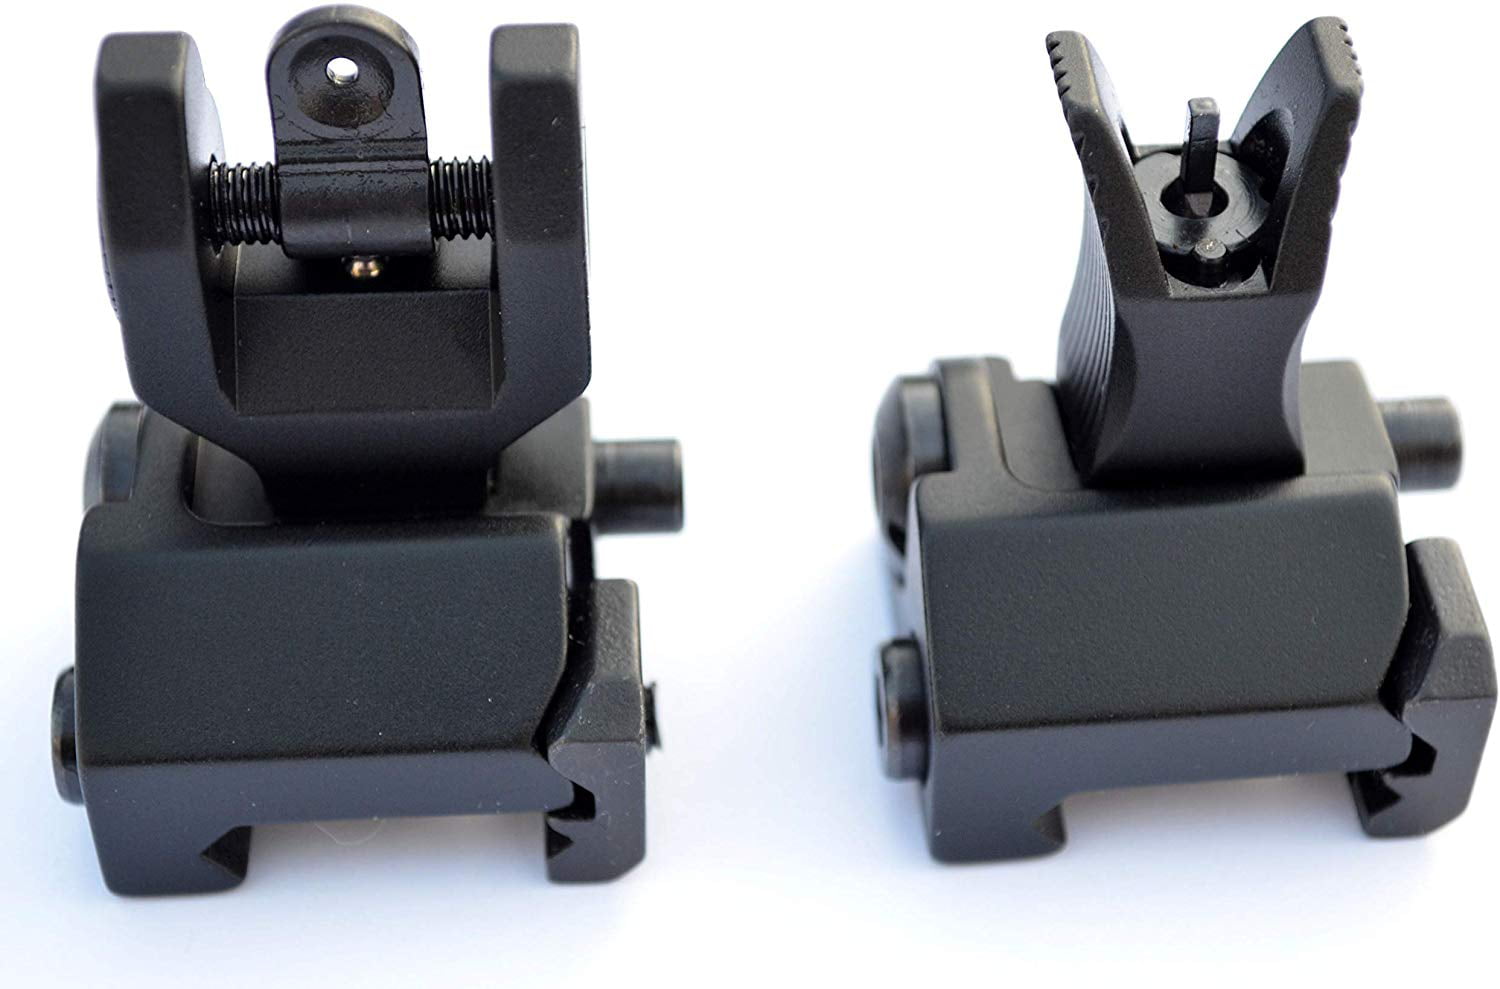 High Profile Detachable Front Iron Sight for Flat top Picatinny Weaver Rail 20MM 